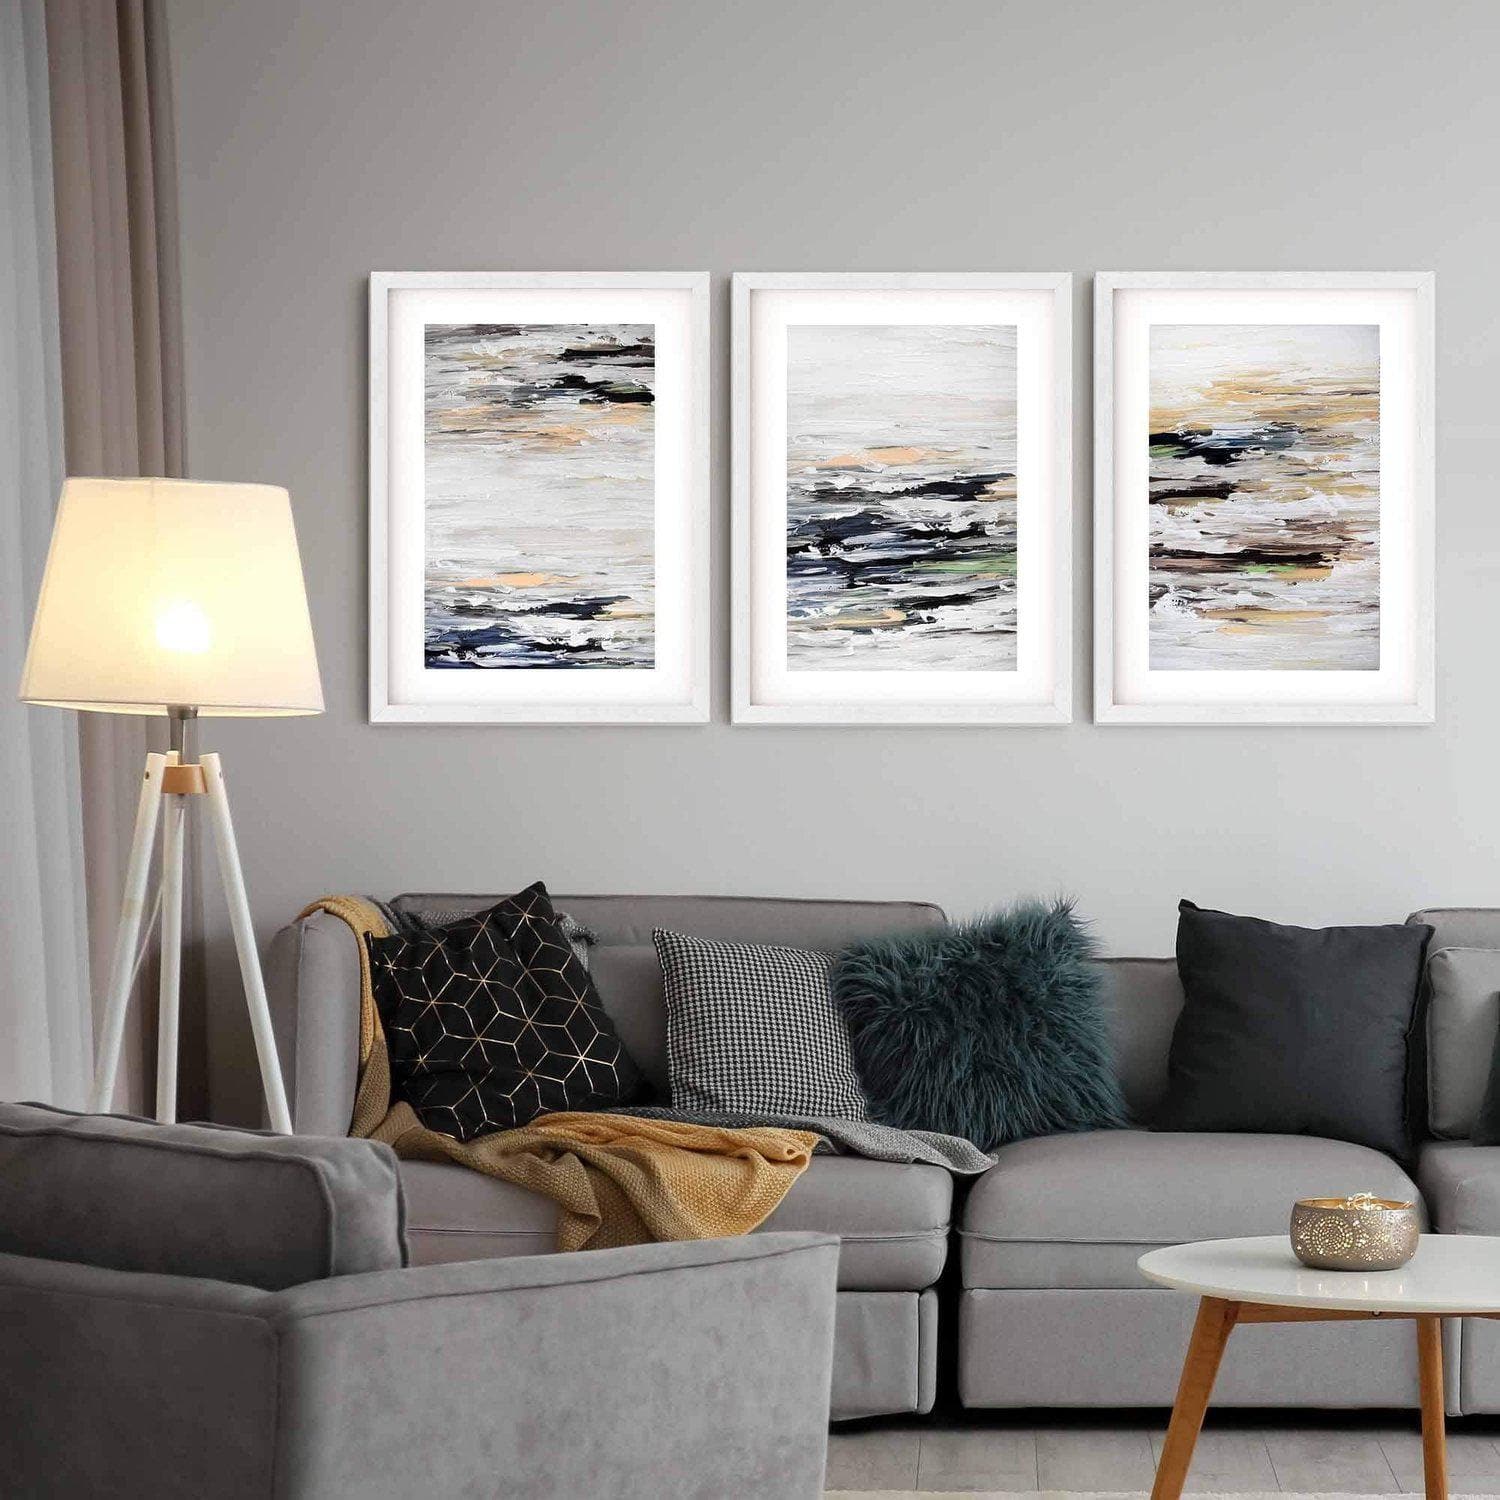 abstract art for living room dawn landscape wall decor